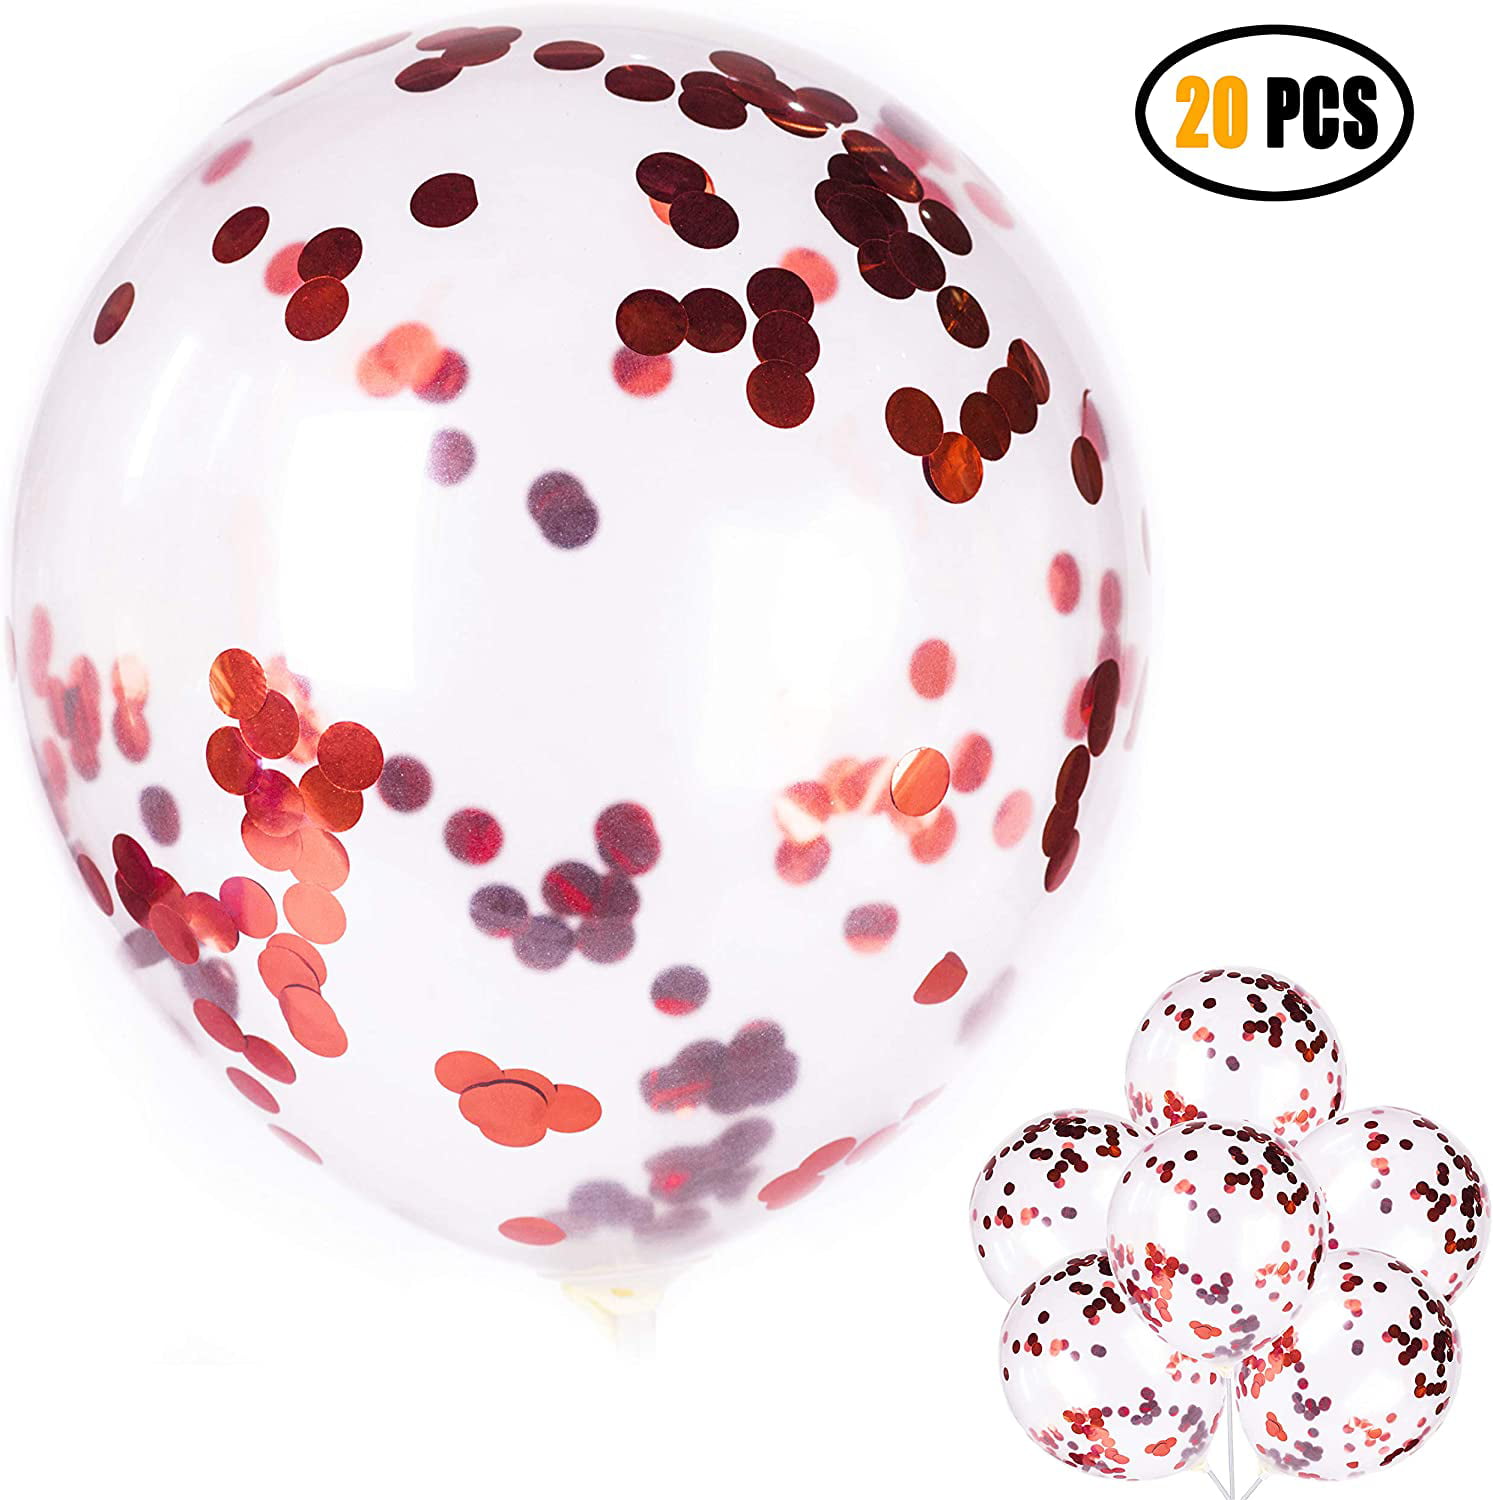 Details about   40PCS Confetti Pearl Latex Balloons Set Birthday Party Decorations Ornaments 